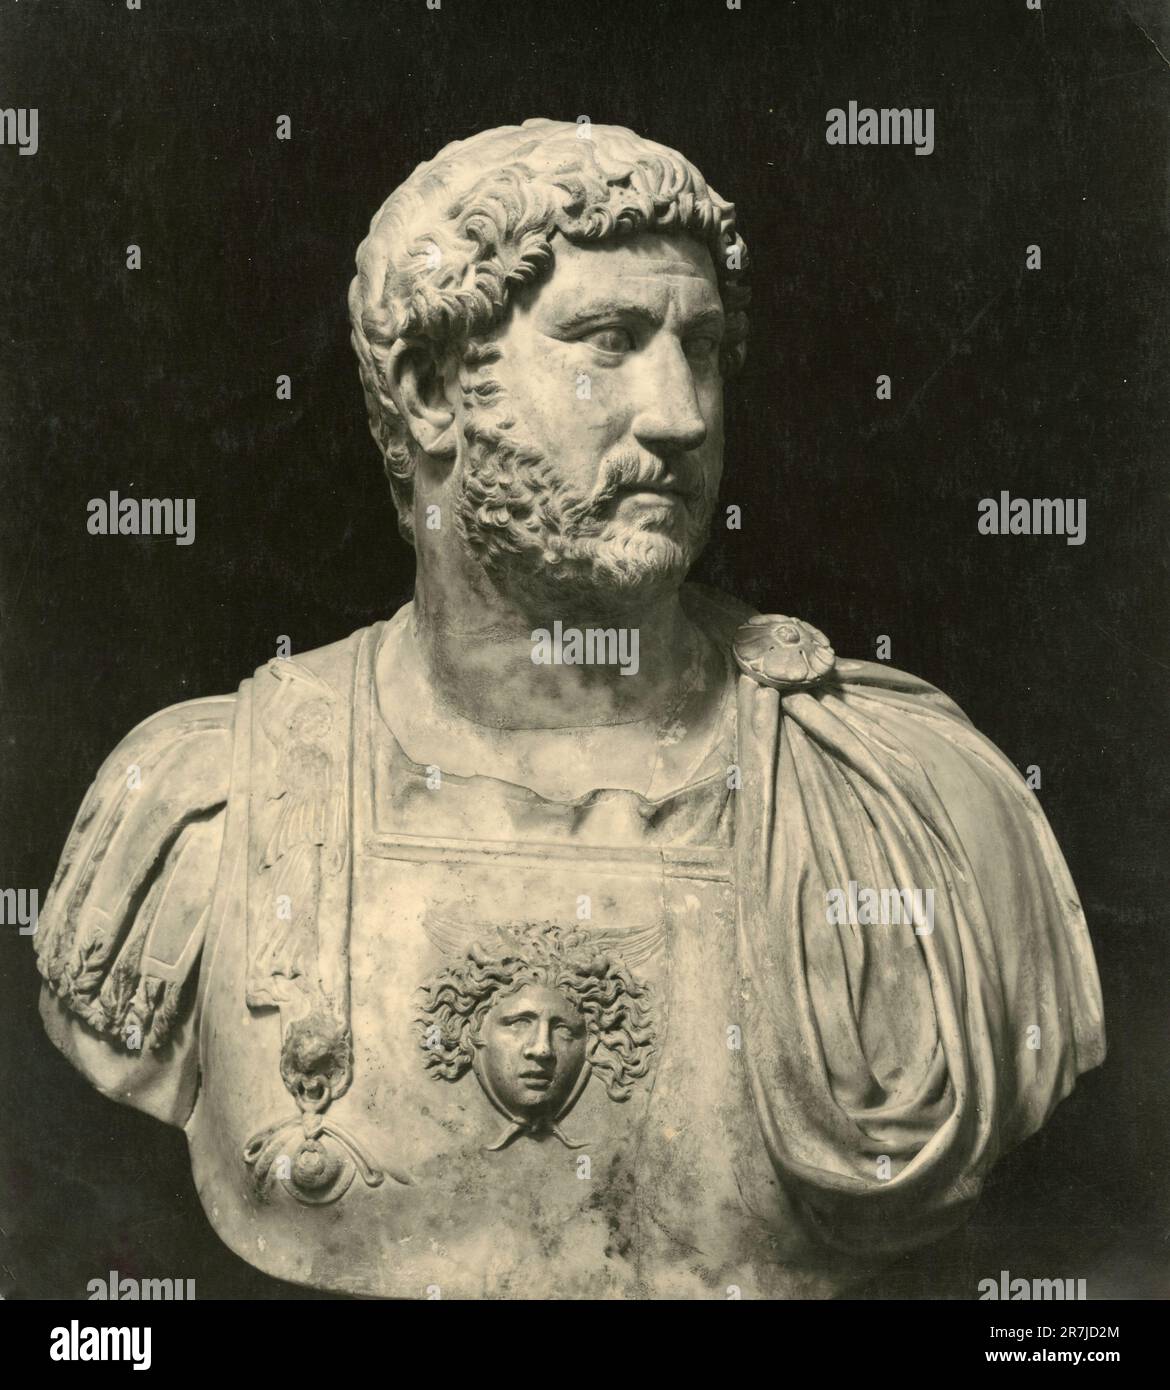 Ancient marble bust statue of Roman Emperor Hadrian, Italy 1900s Stock Photo